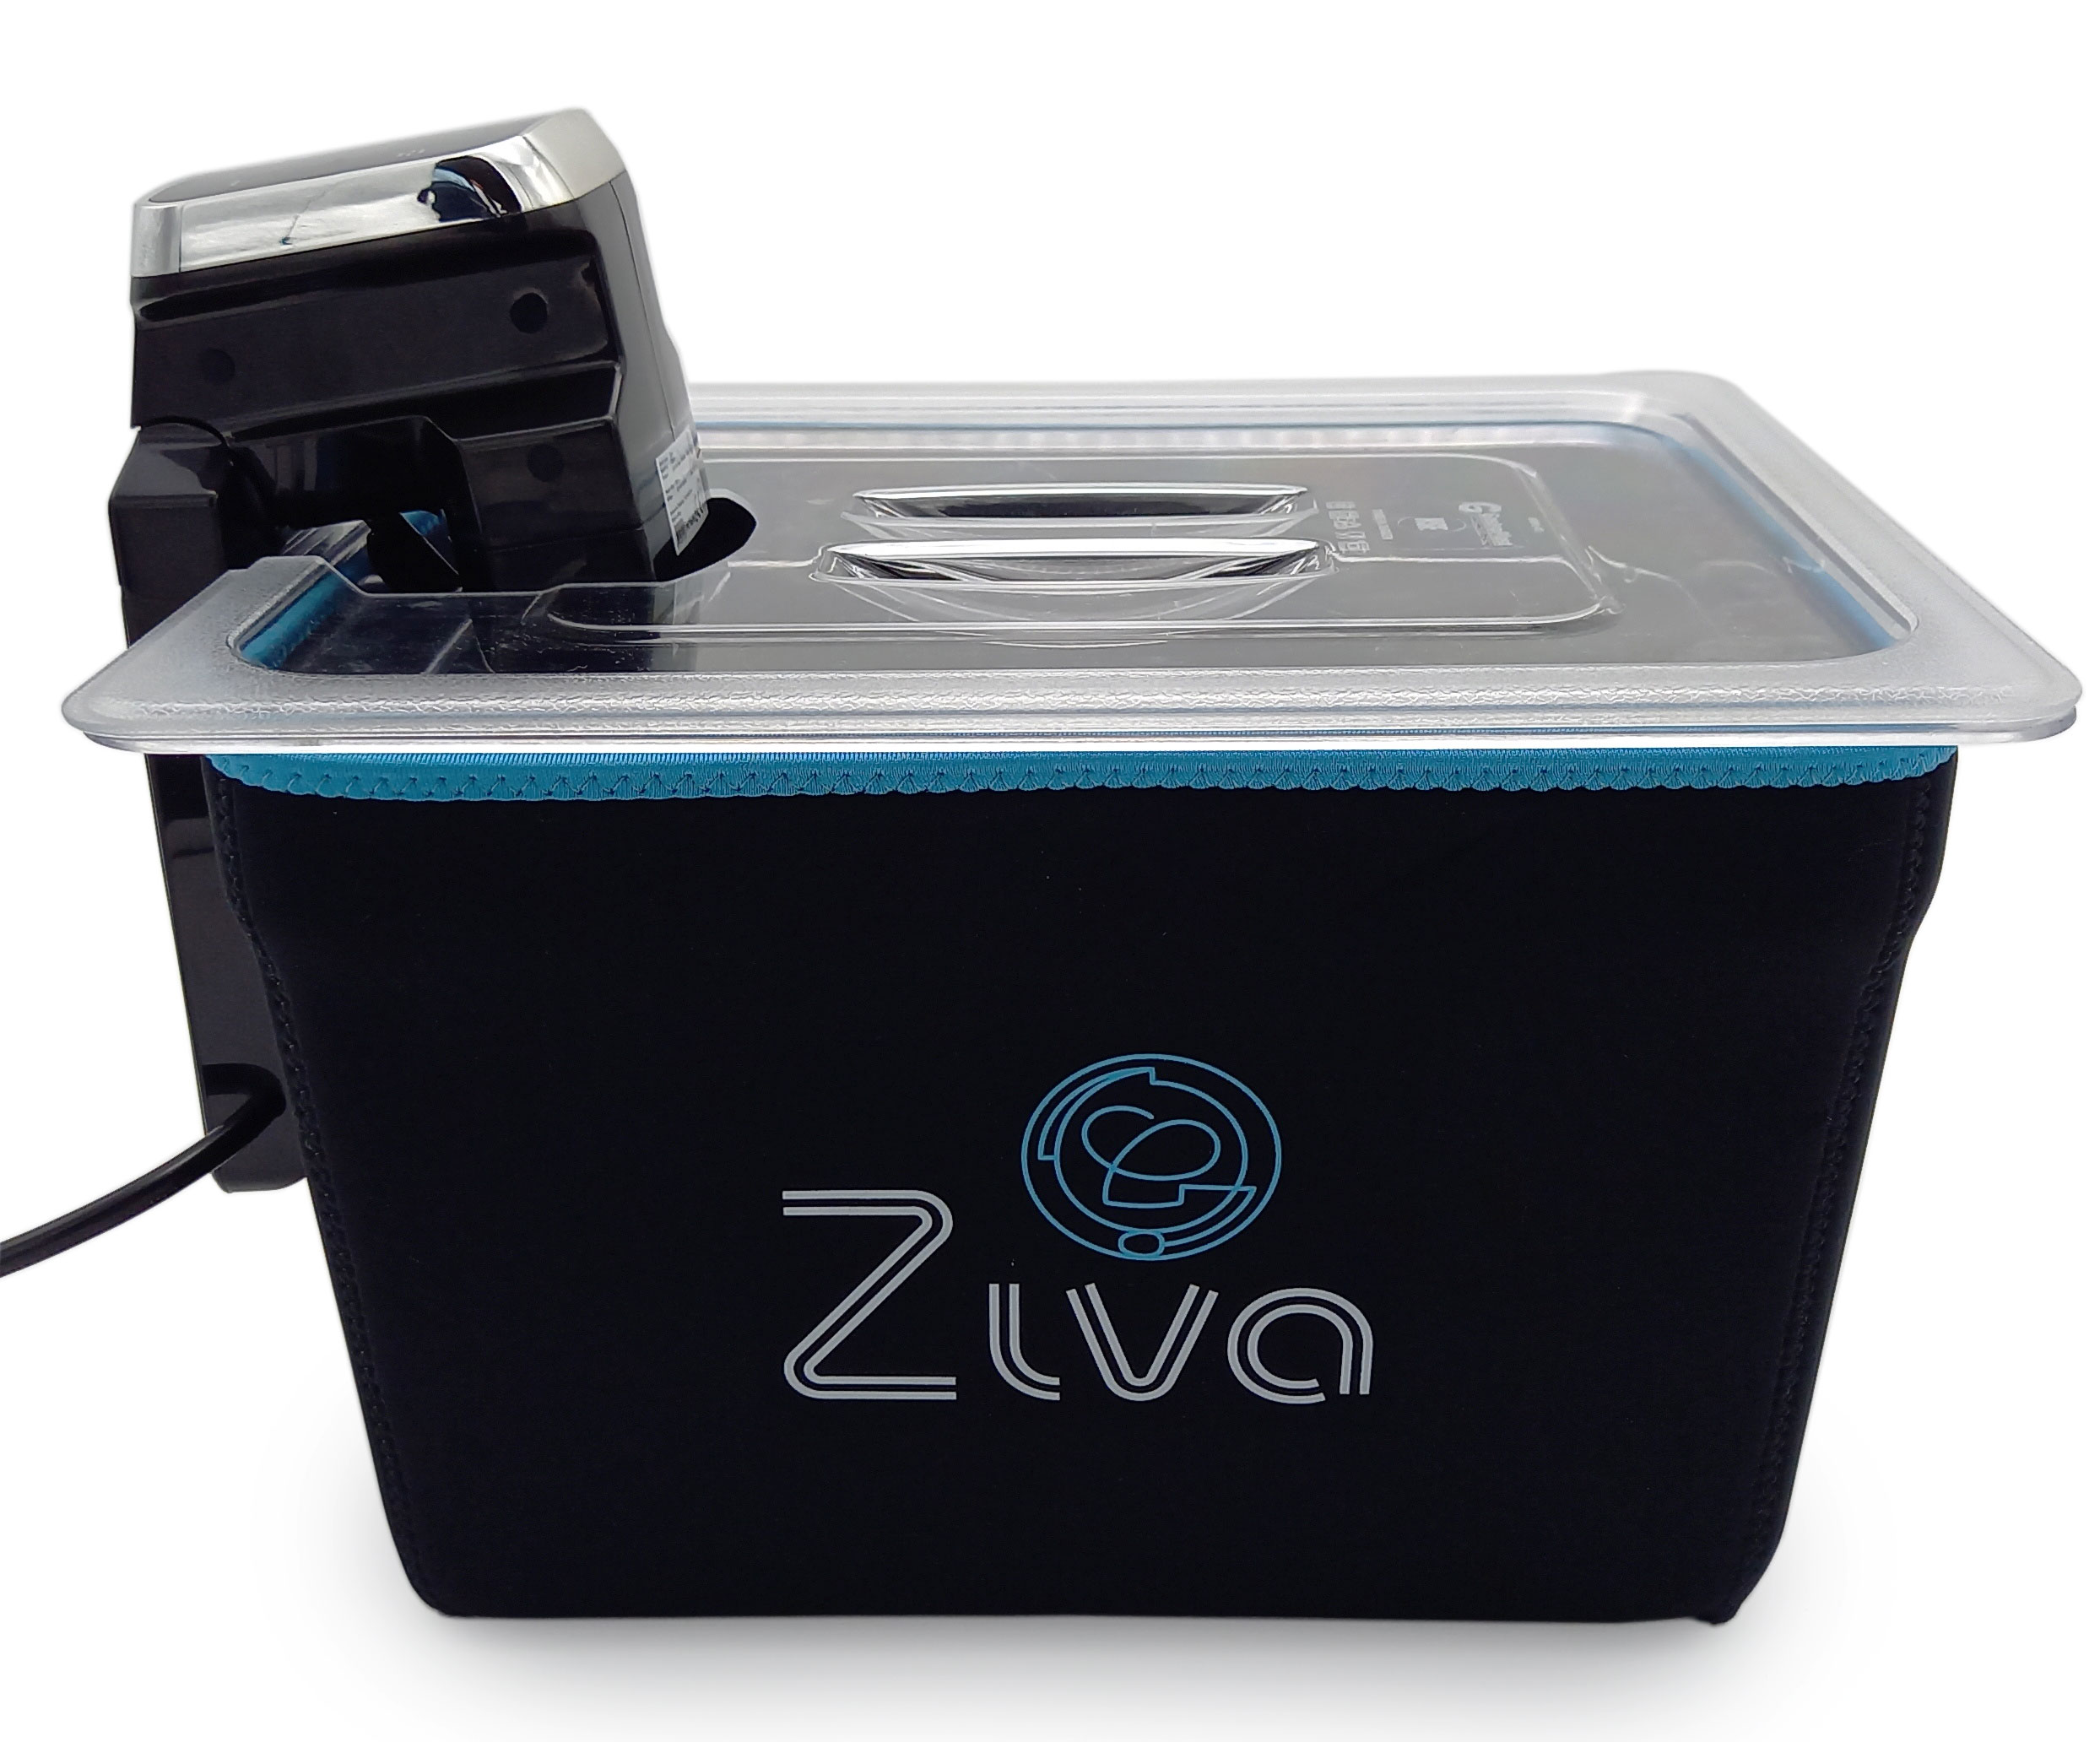 Ziva Sous vide Insolation Cover /Sleeve (M)